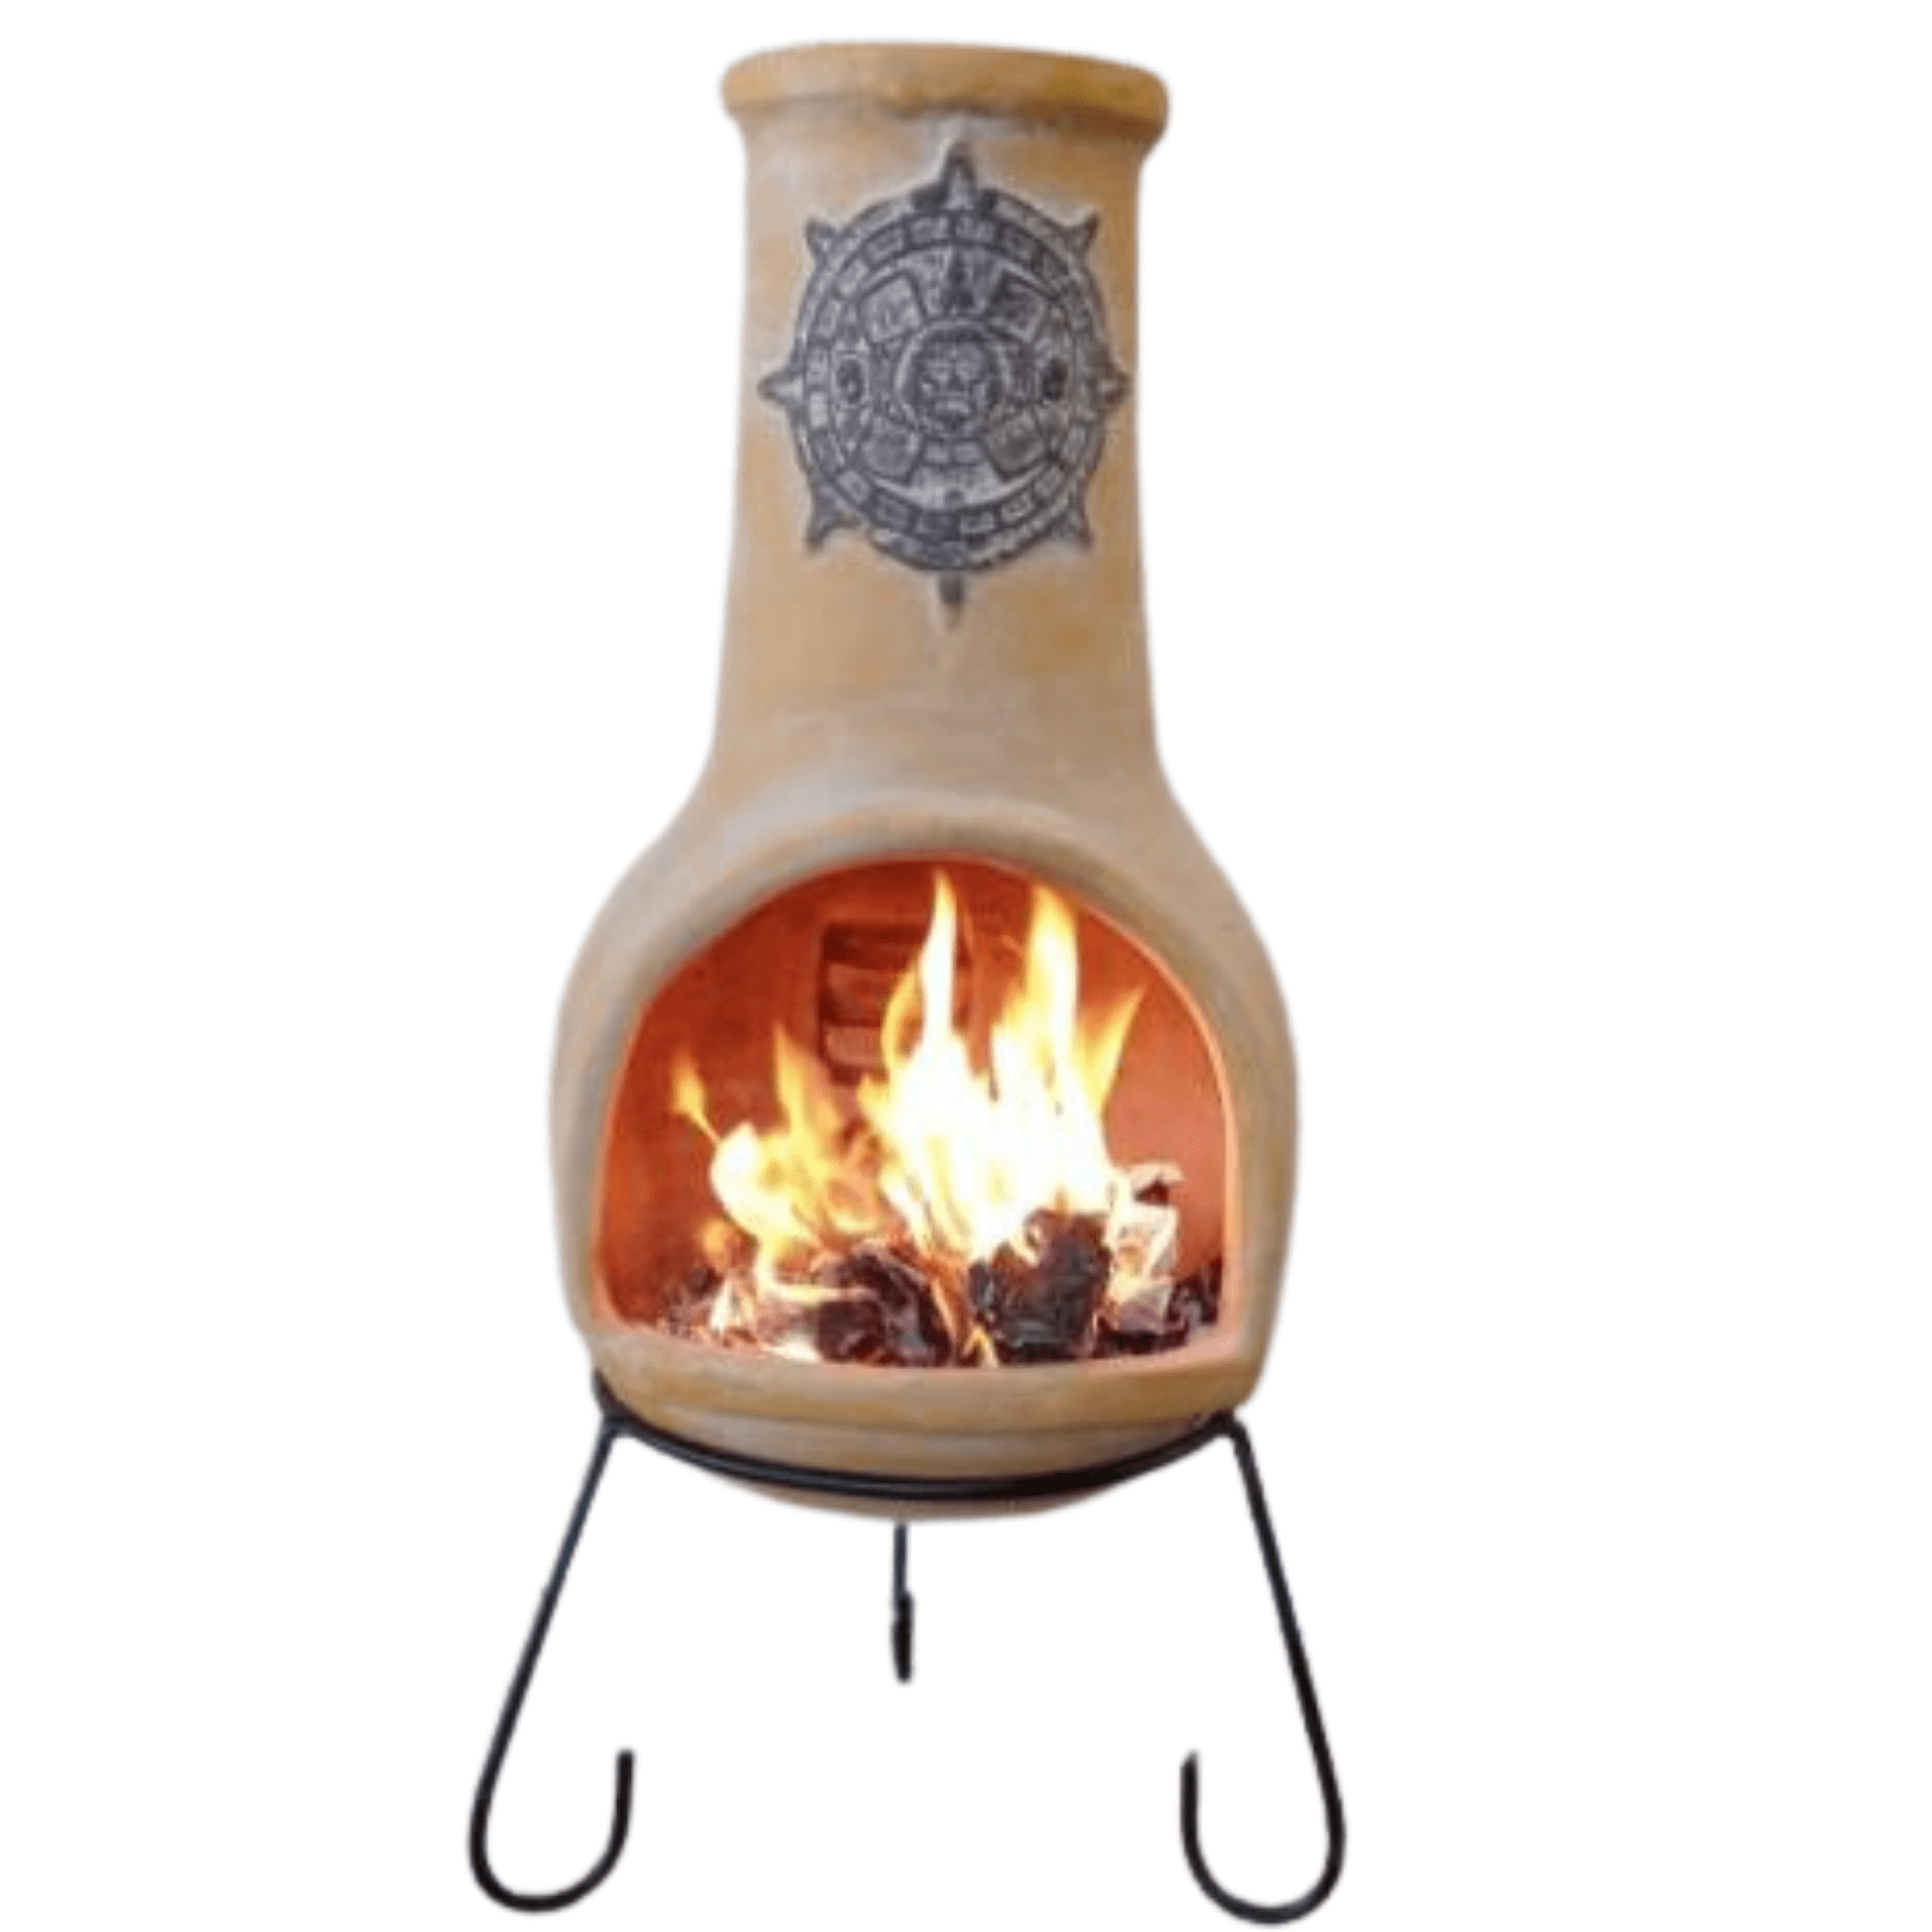 Perfect Patio UK Extra-Large Tulum Mexican Chimenea in yellow